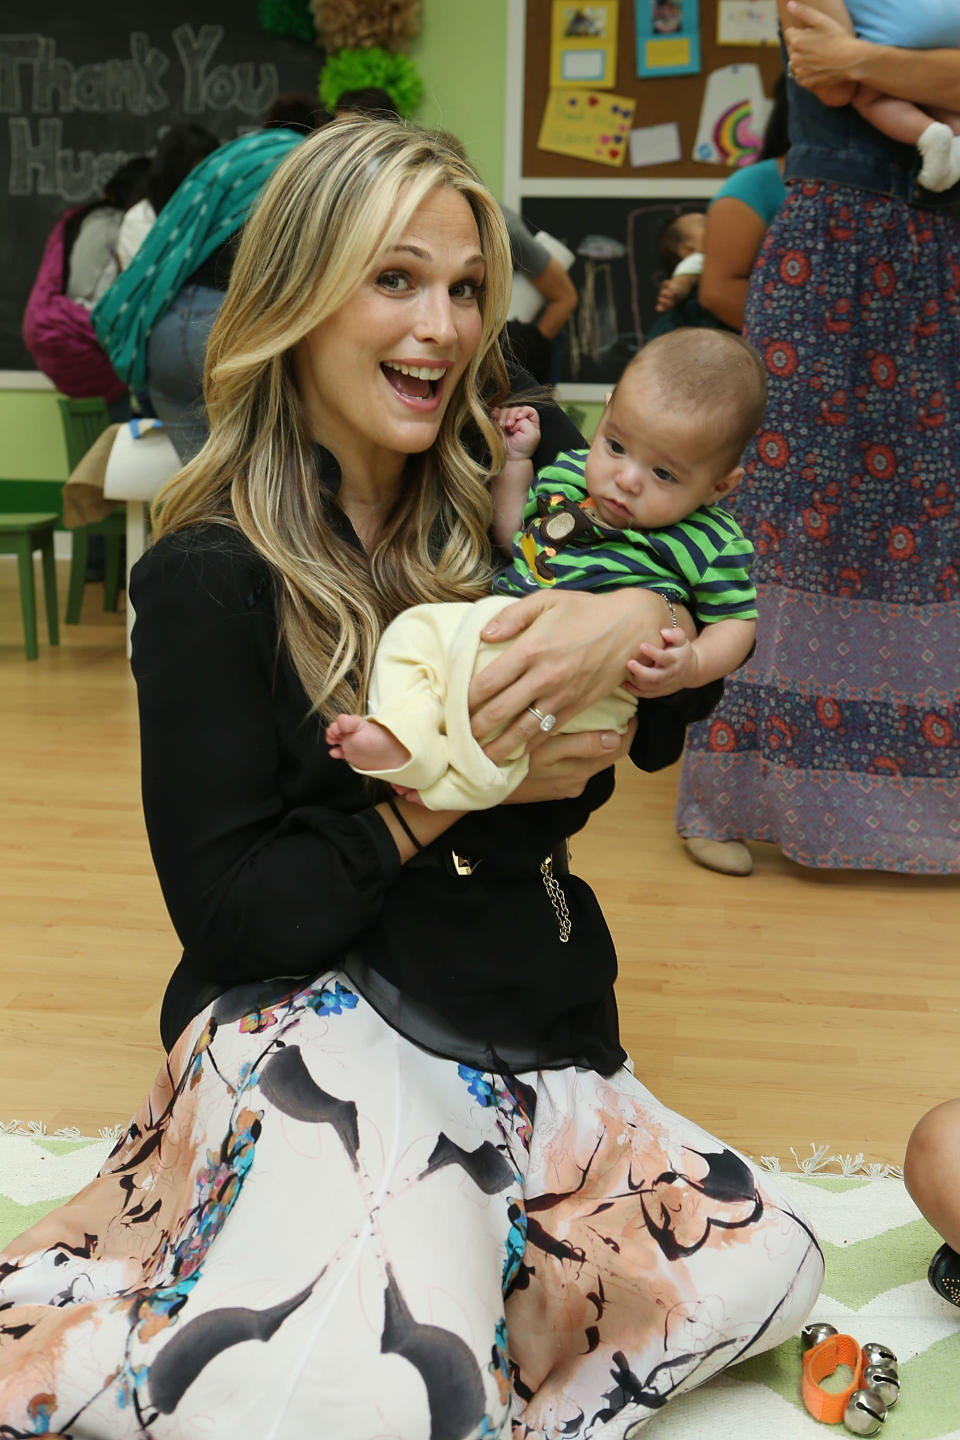 Model Molly Sims gave birth to her first child, son Brooks Alan Stuber on June 19.